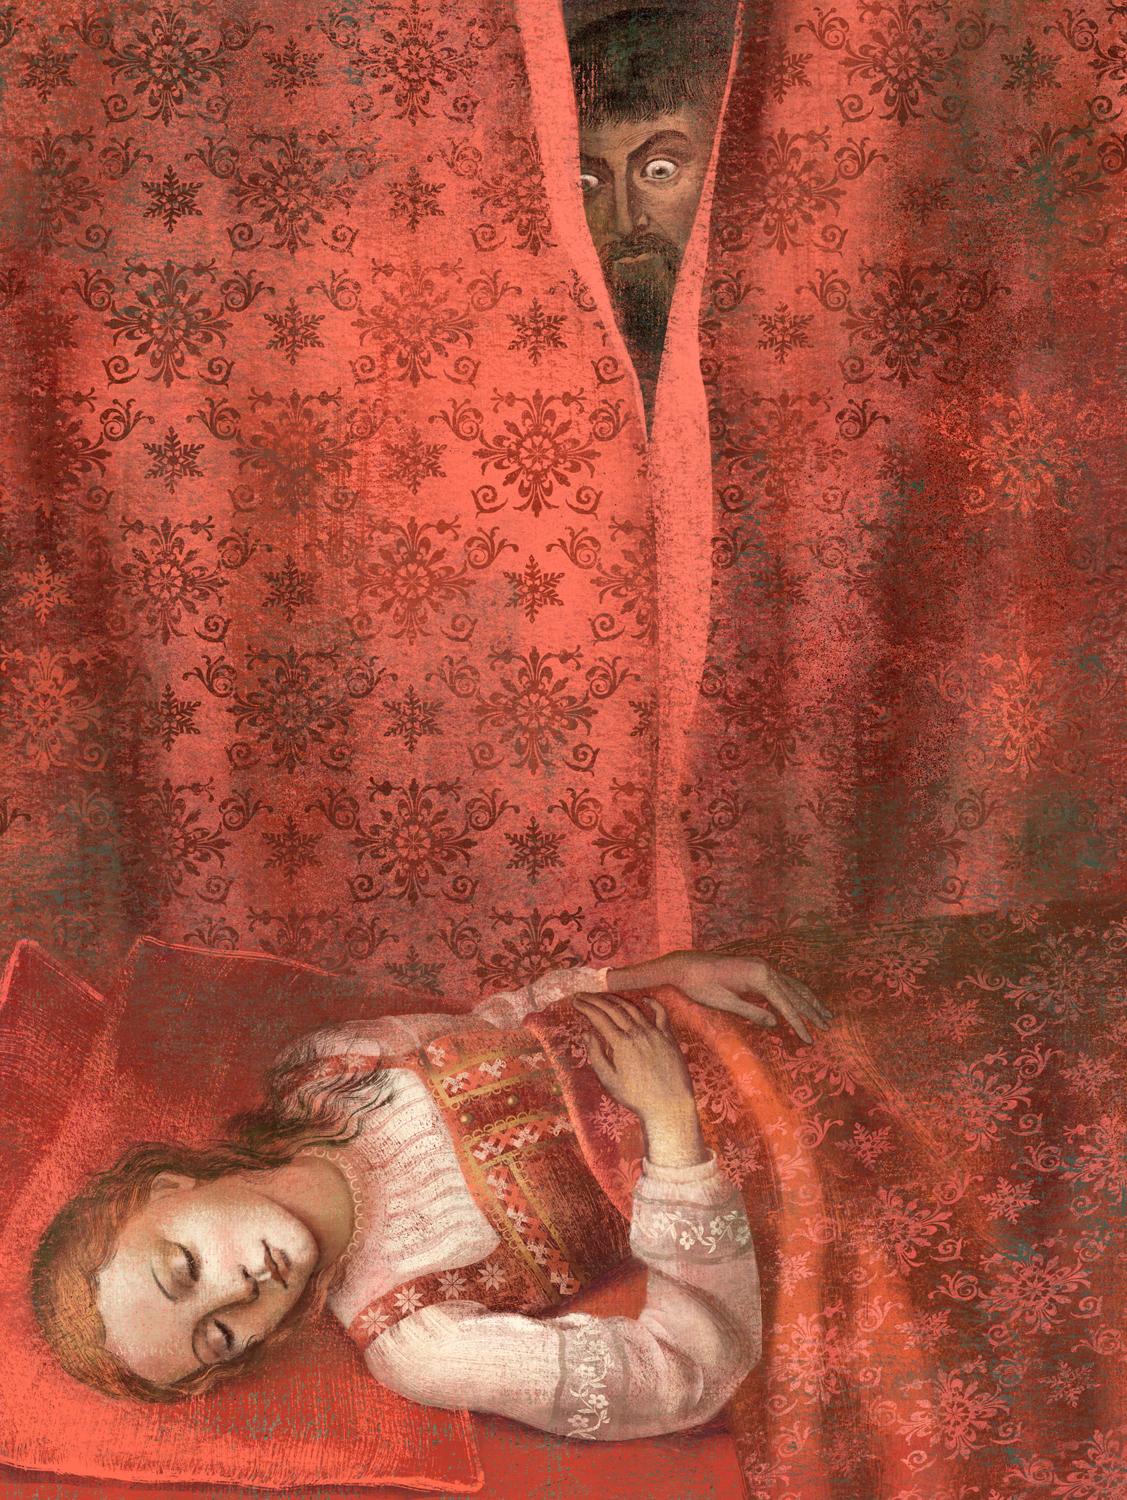 by Alexander Pushkin ©Balbusso Twins. All rights reserved.